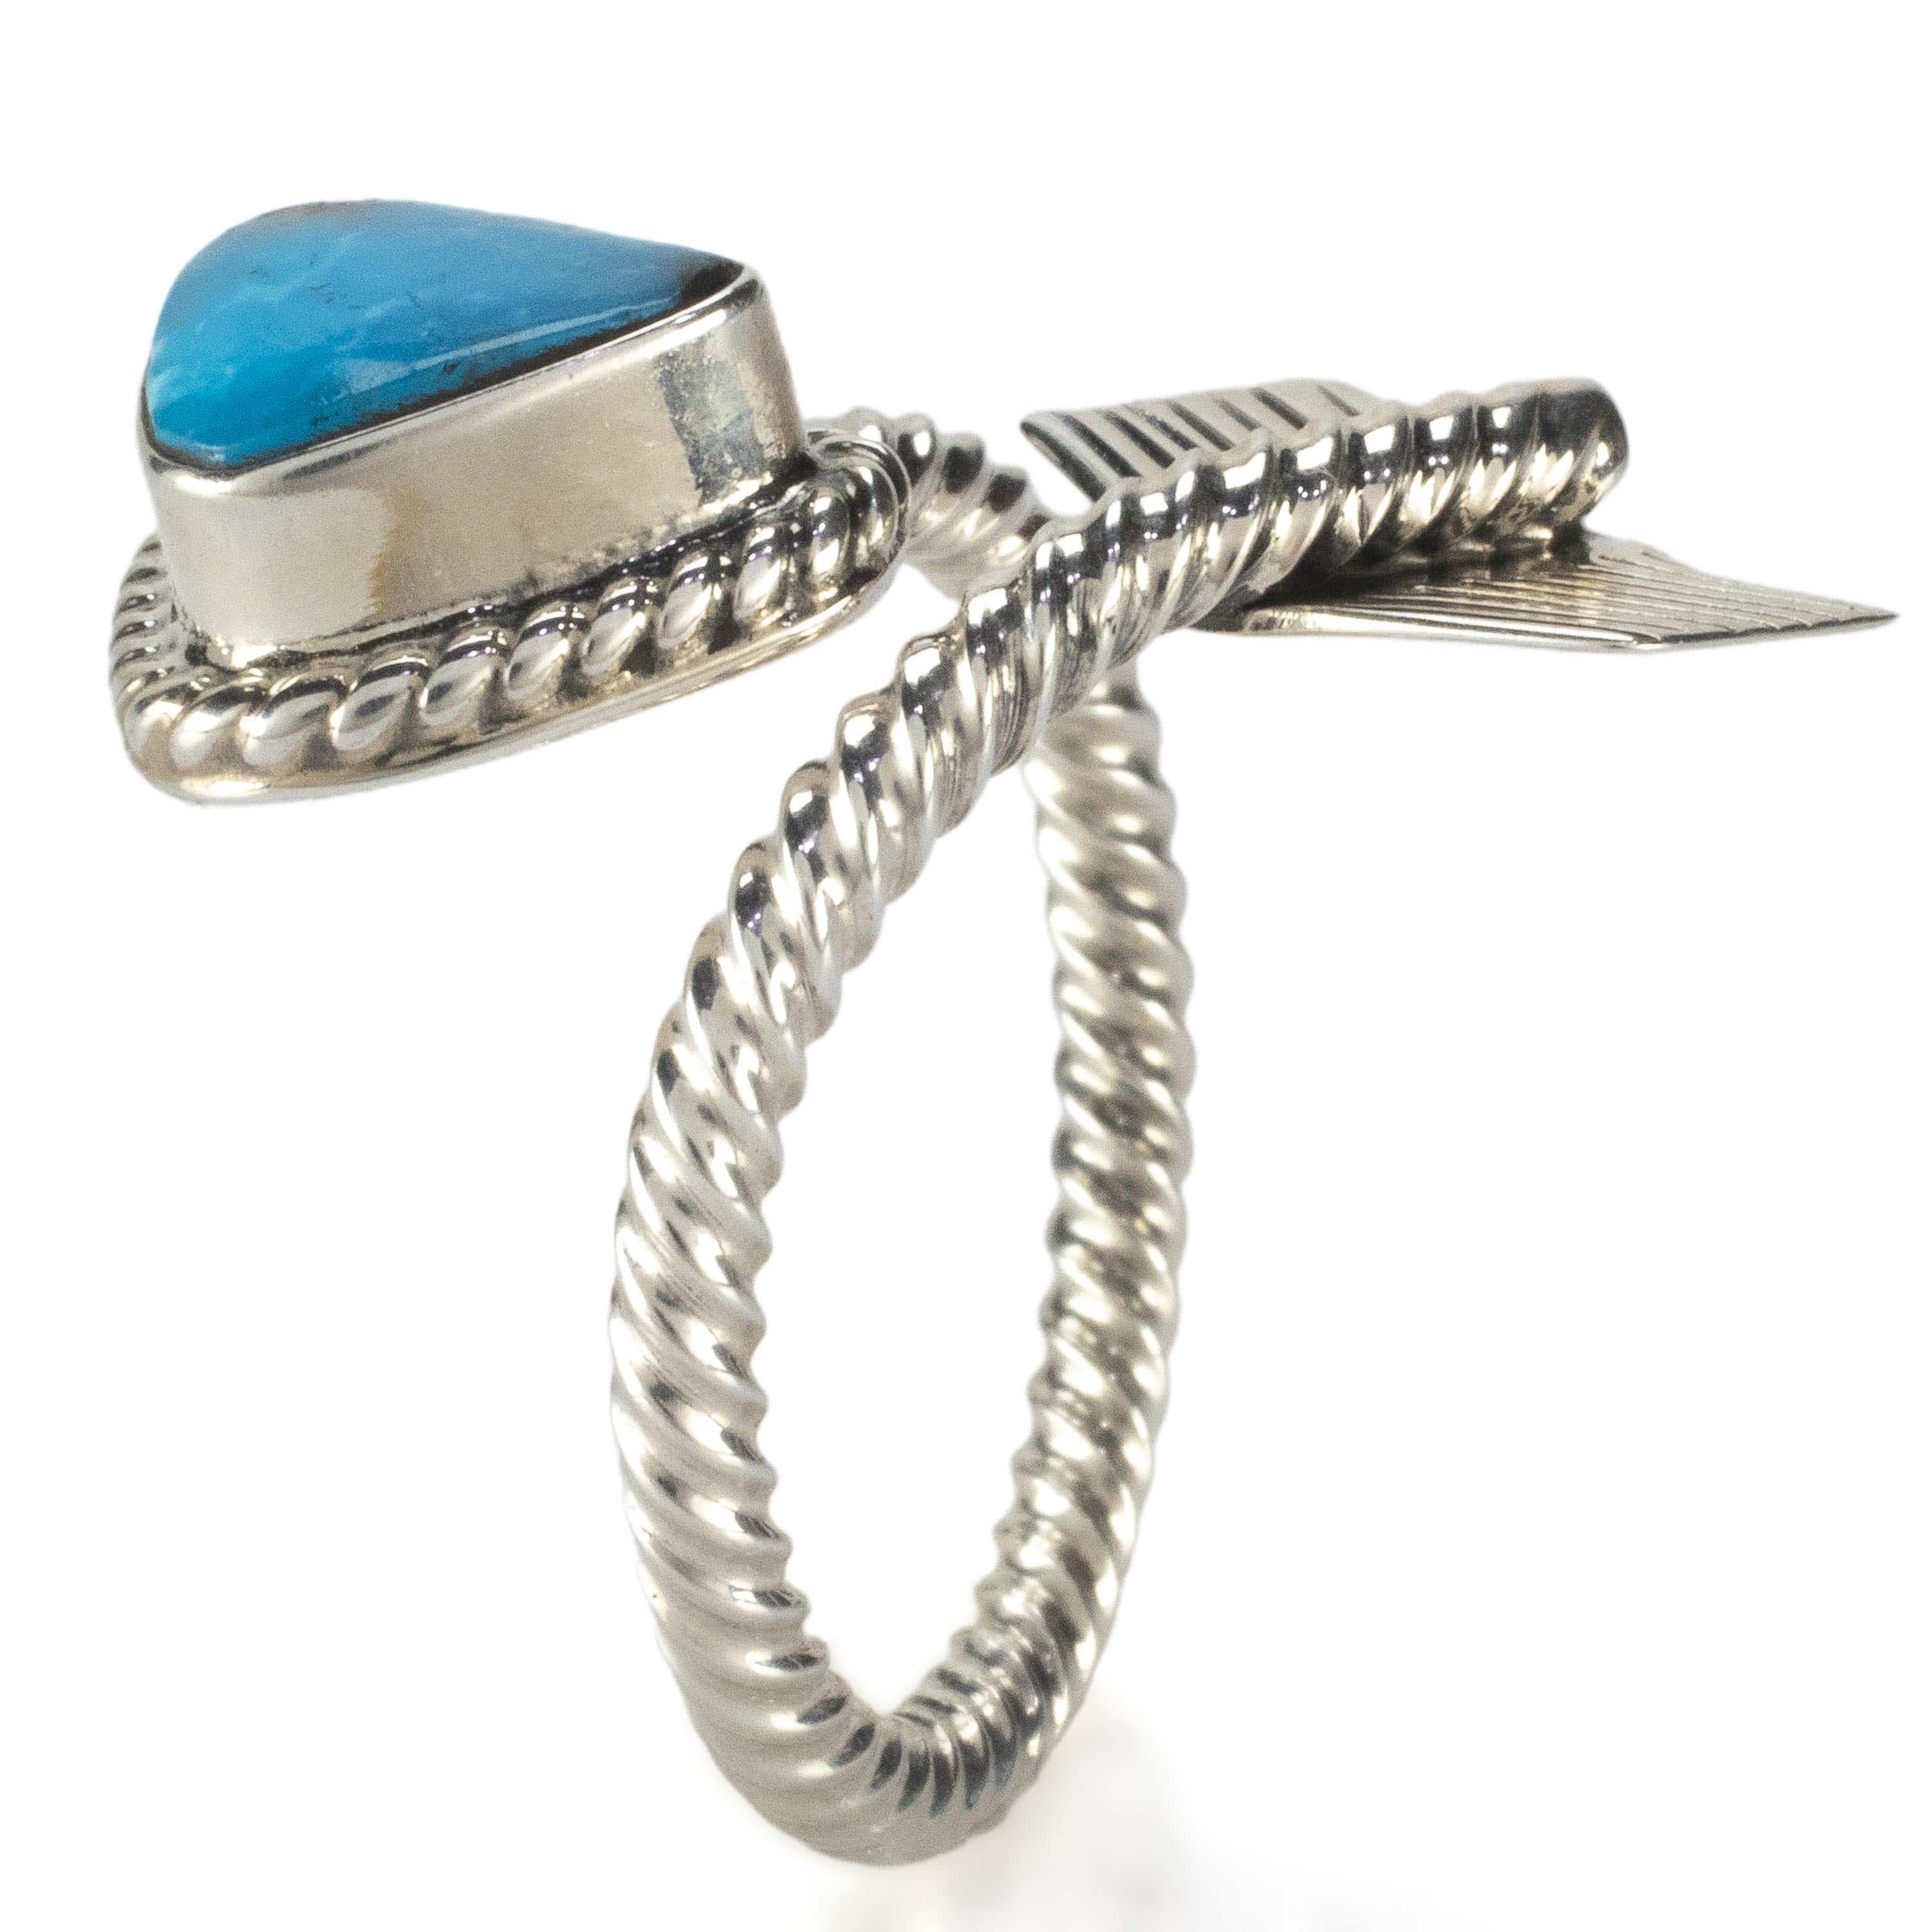 Kalifano Native American Jewelry Running Bear Kingman Turquoise Arrow USA Native American Made 925 Sterling Silver Ring